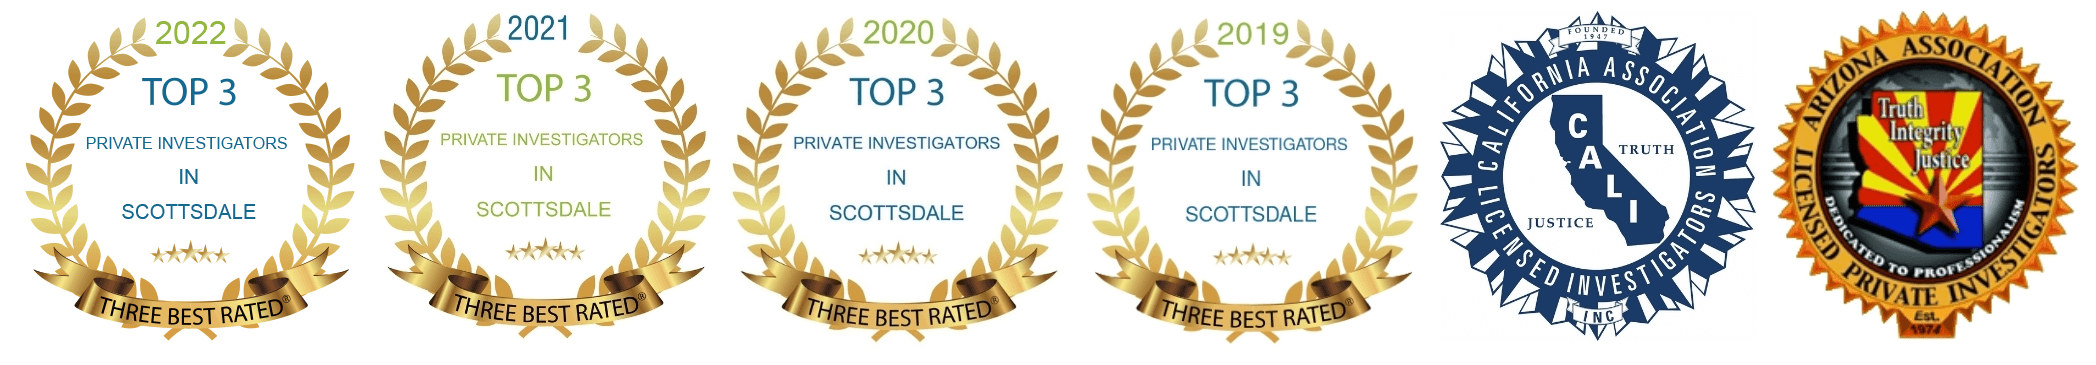 Rated Top Private Investigator in Scottsdale 4 Years in a Row